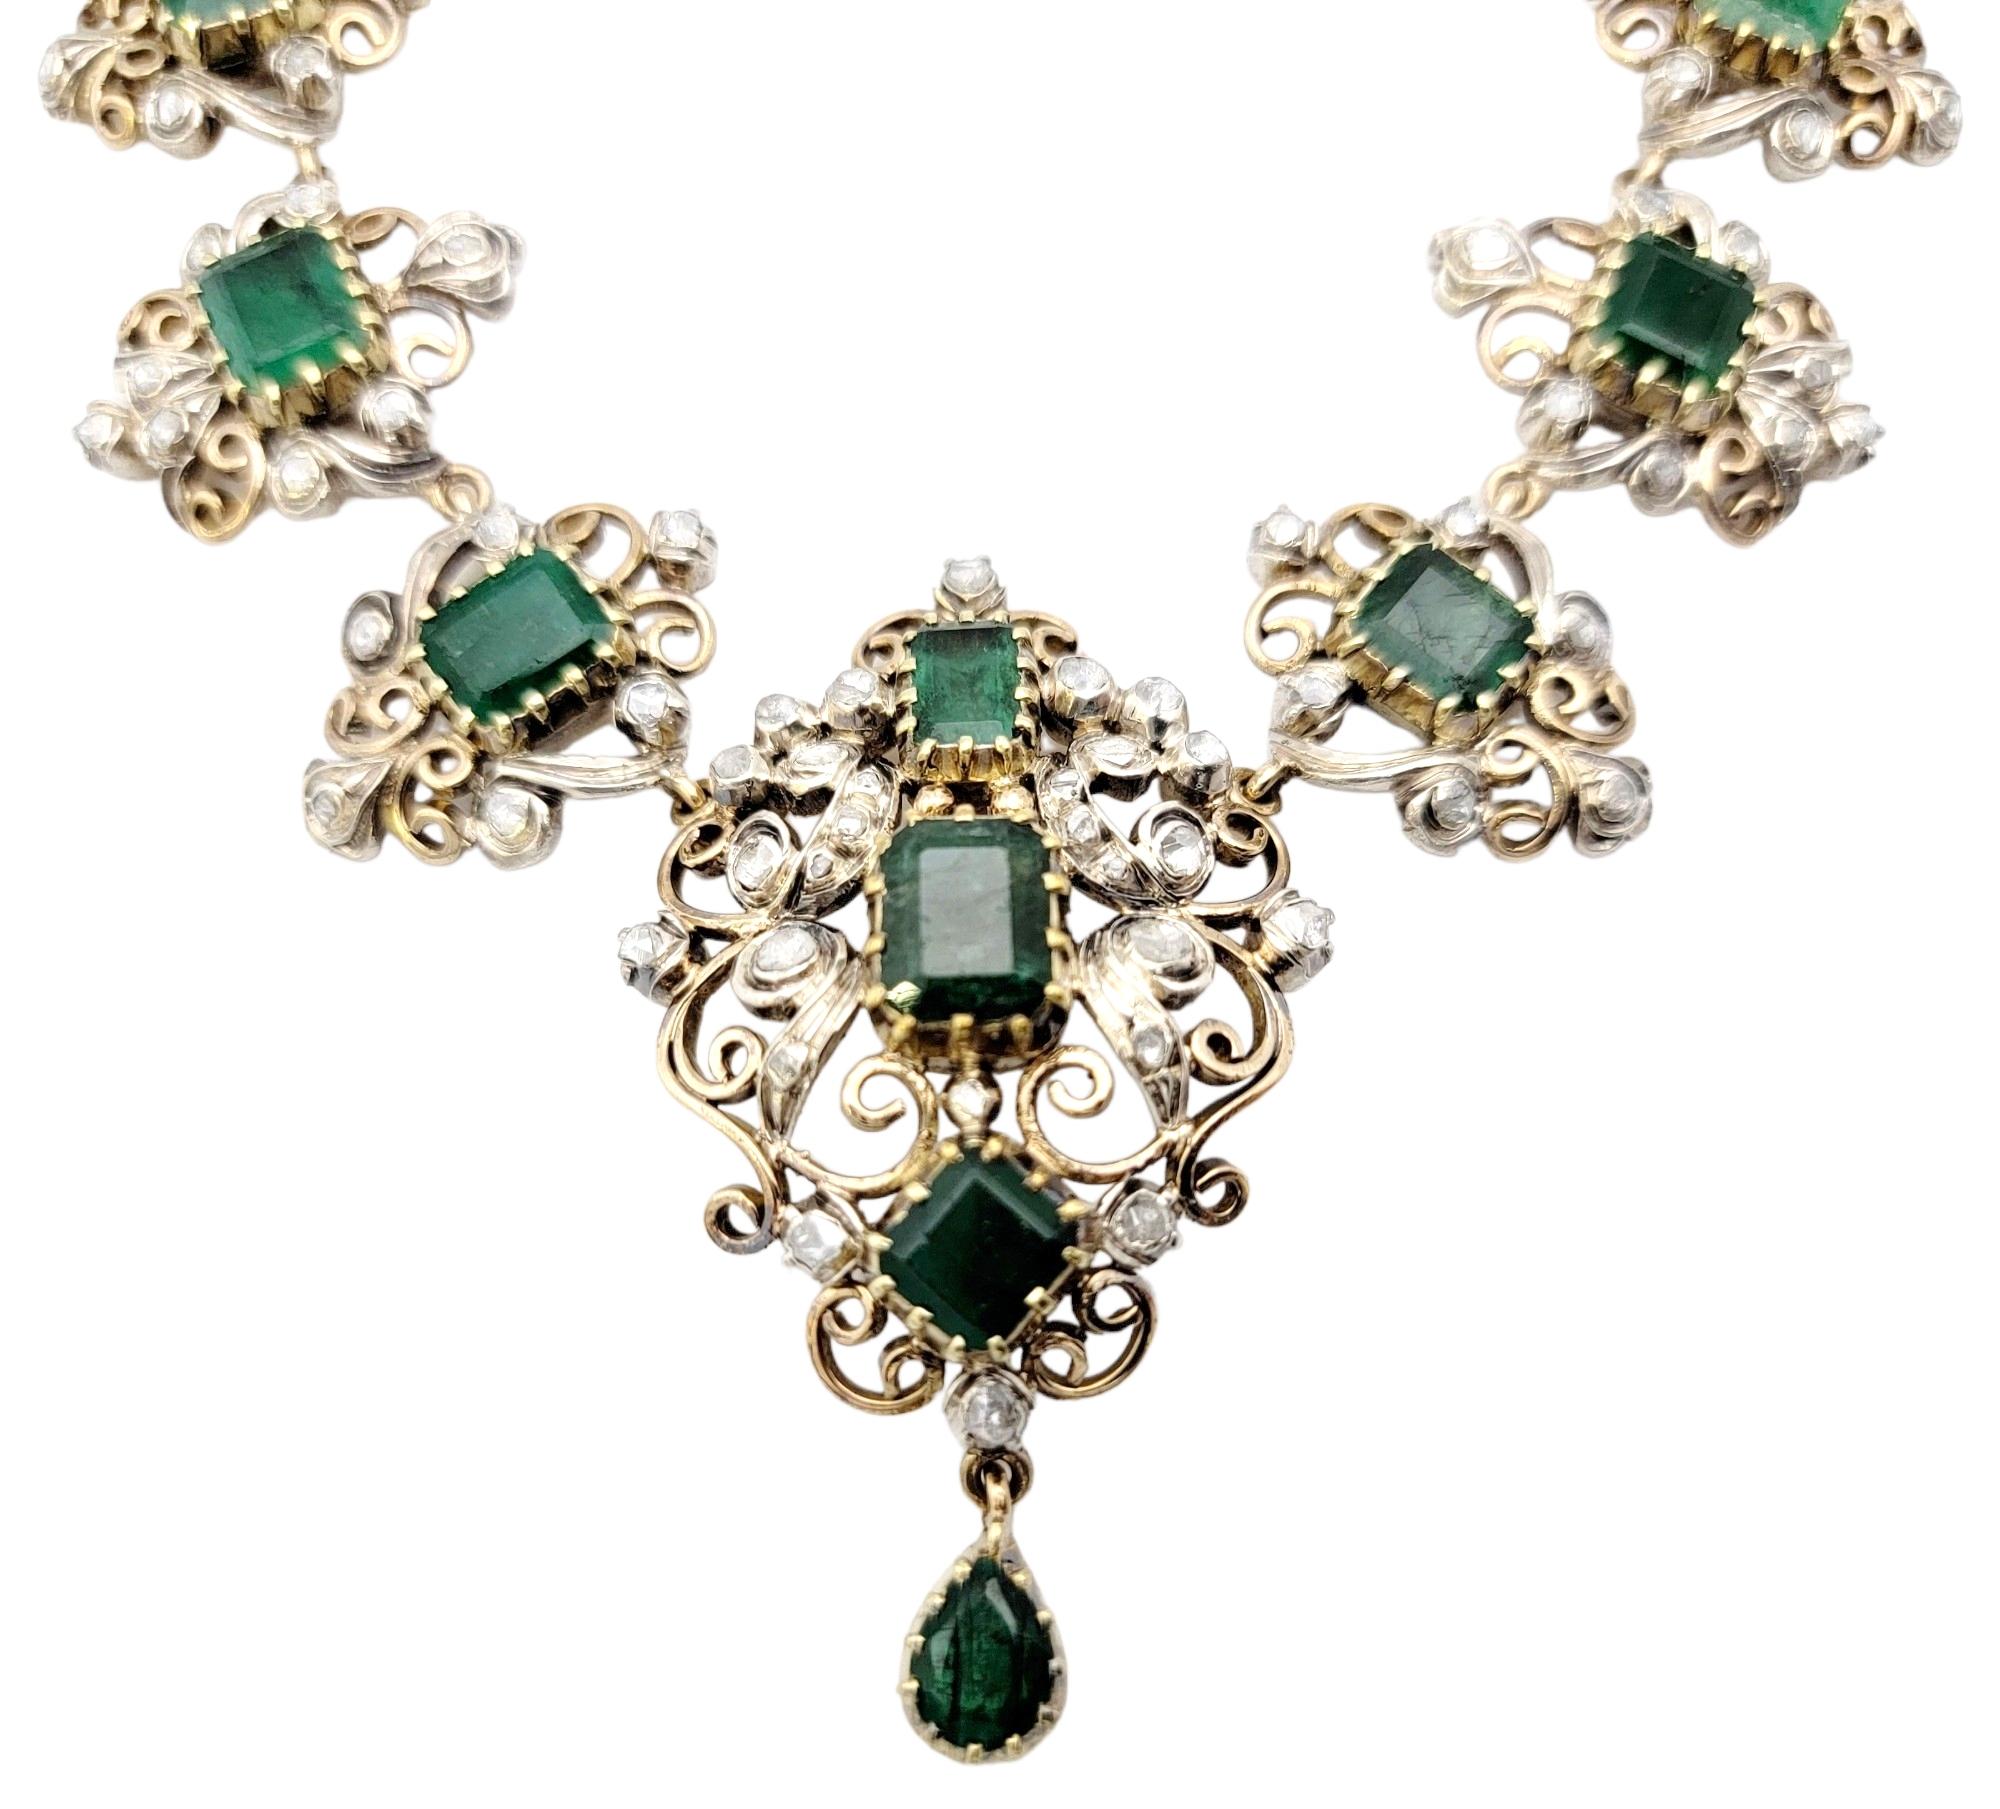 Transport yourself to a world of timeless beauty and sophistication with this extraordinary antique Victorian era graduated necklace. Adorned with mesmerizing emeralds and dazzling diamonds, this exquisite piece captures the essence of a bygone